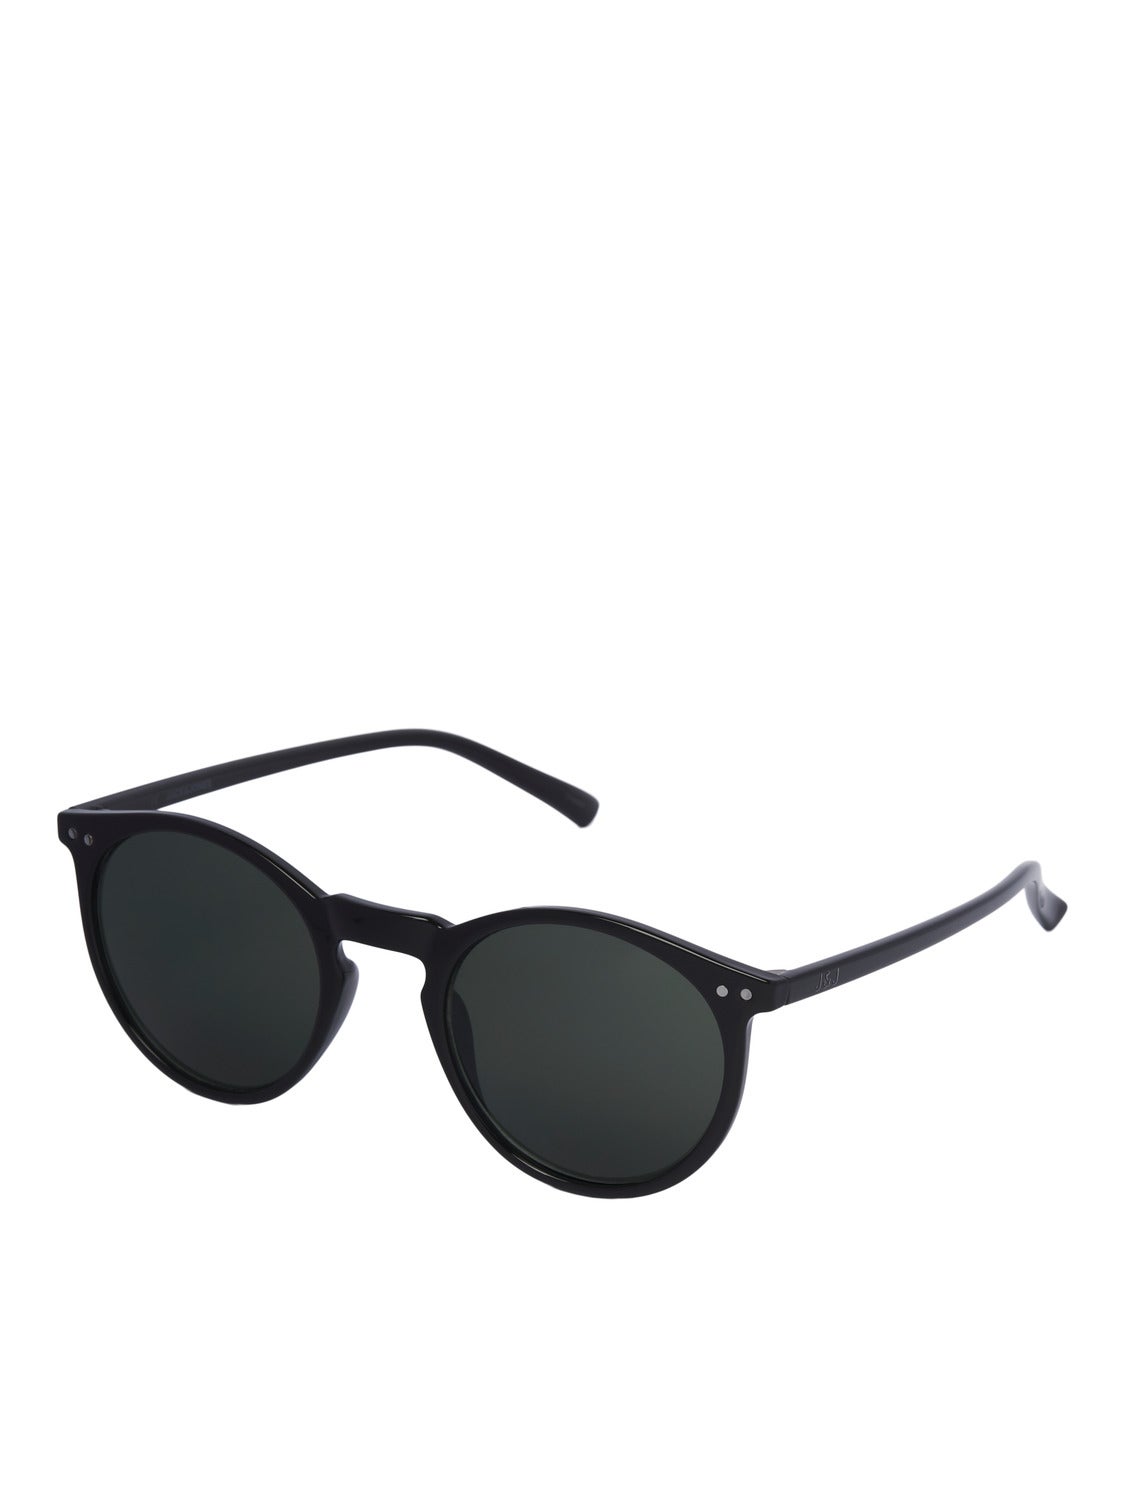 Top more than 135 jack and jones sunglasses latest